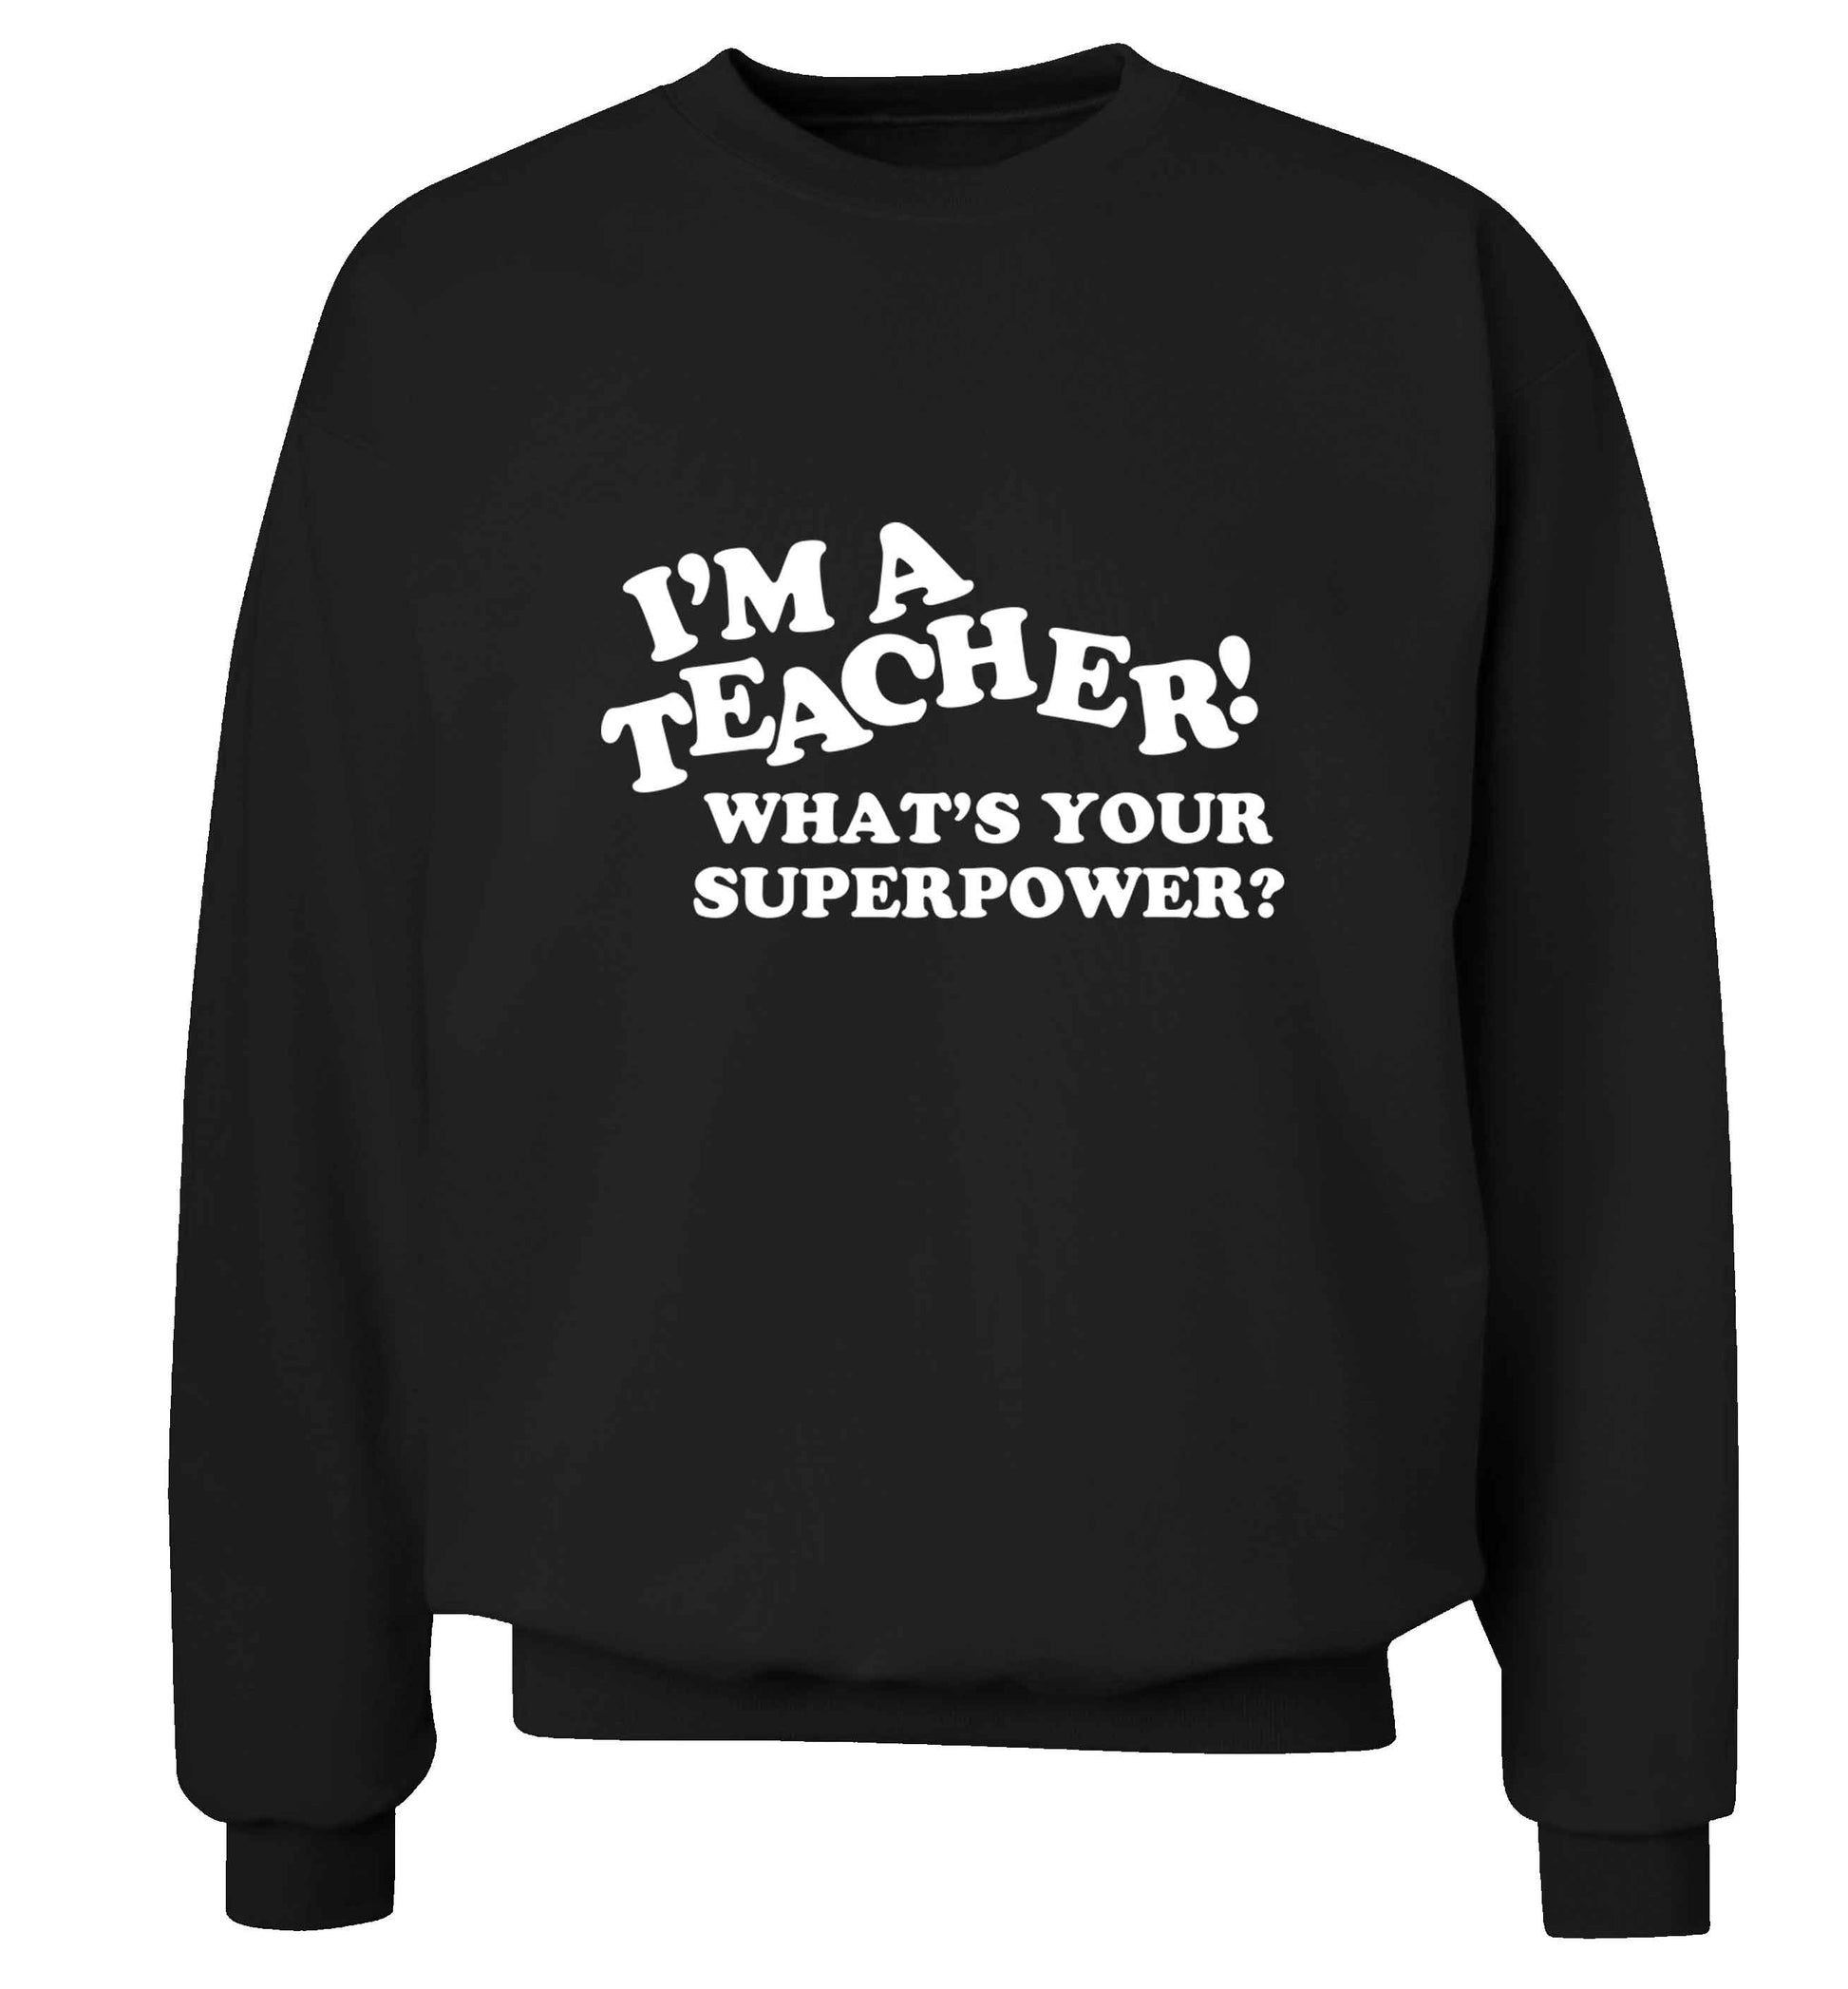 I'm a teacher what's your superpower?! adult's unisex black sweater 2XL